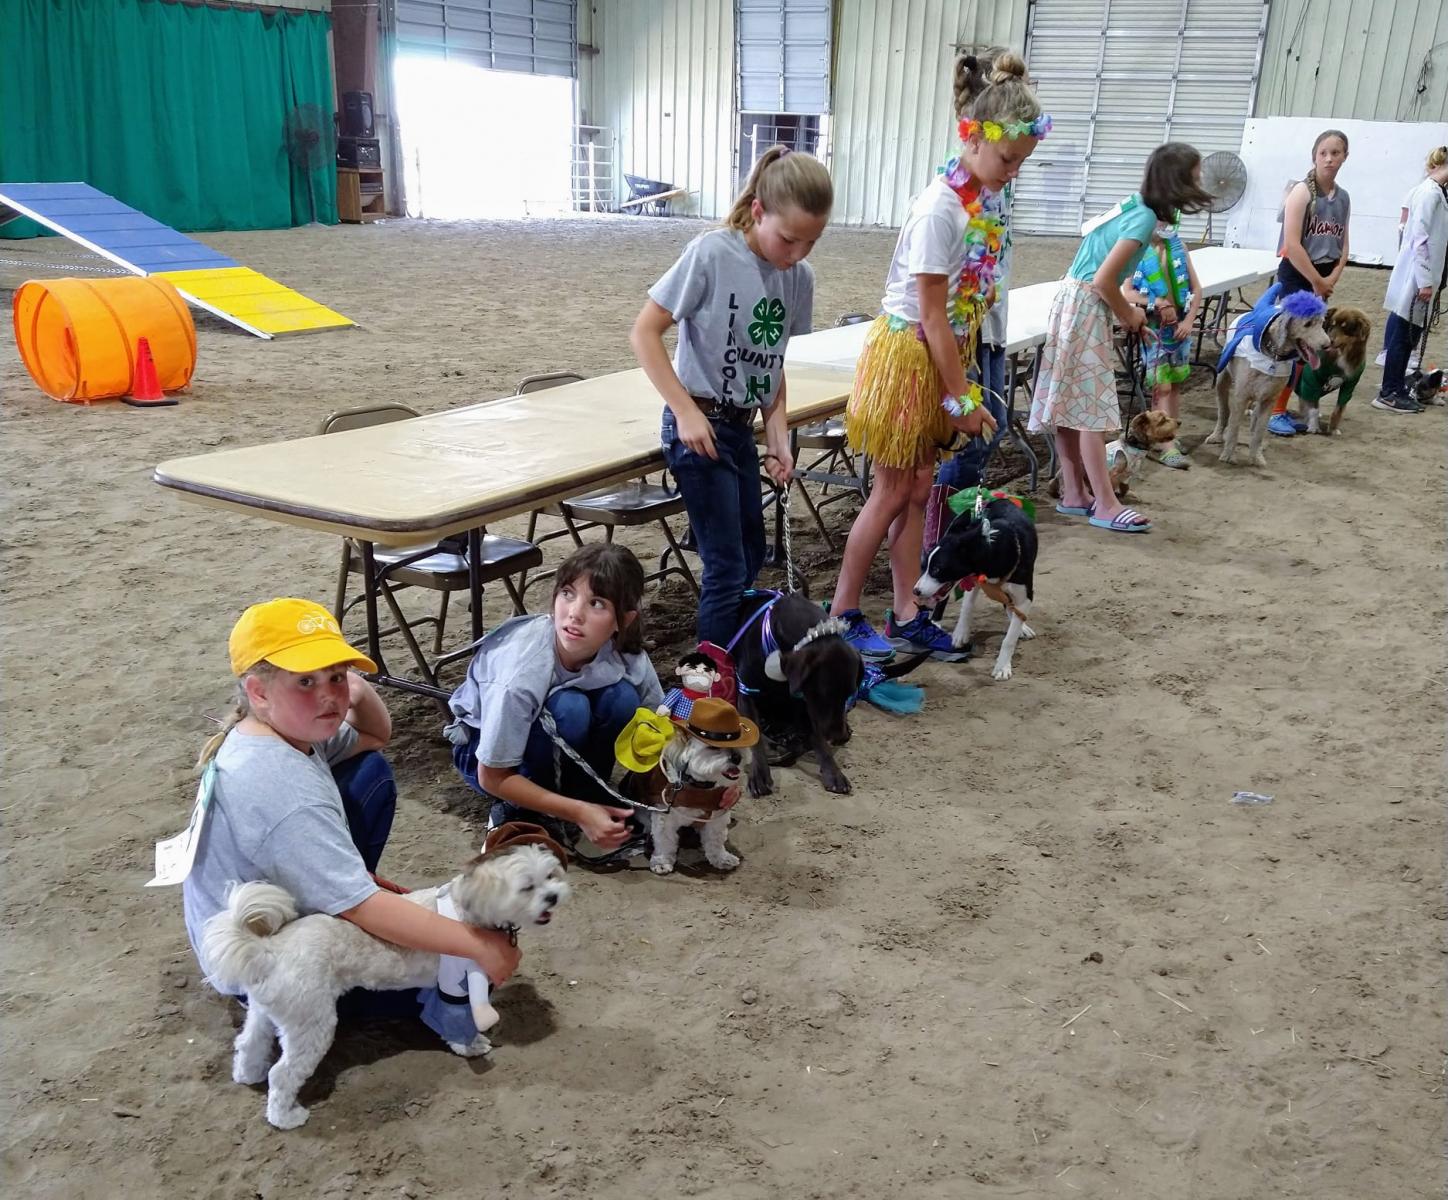 4-H Dog show competition